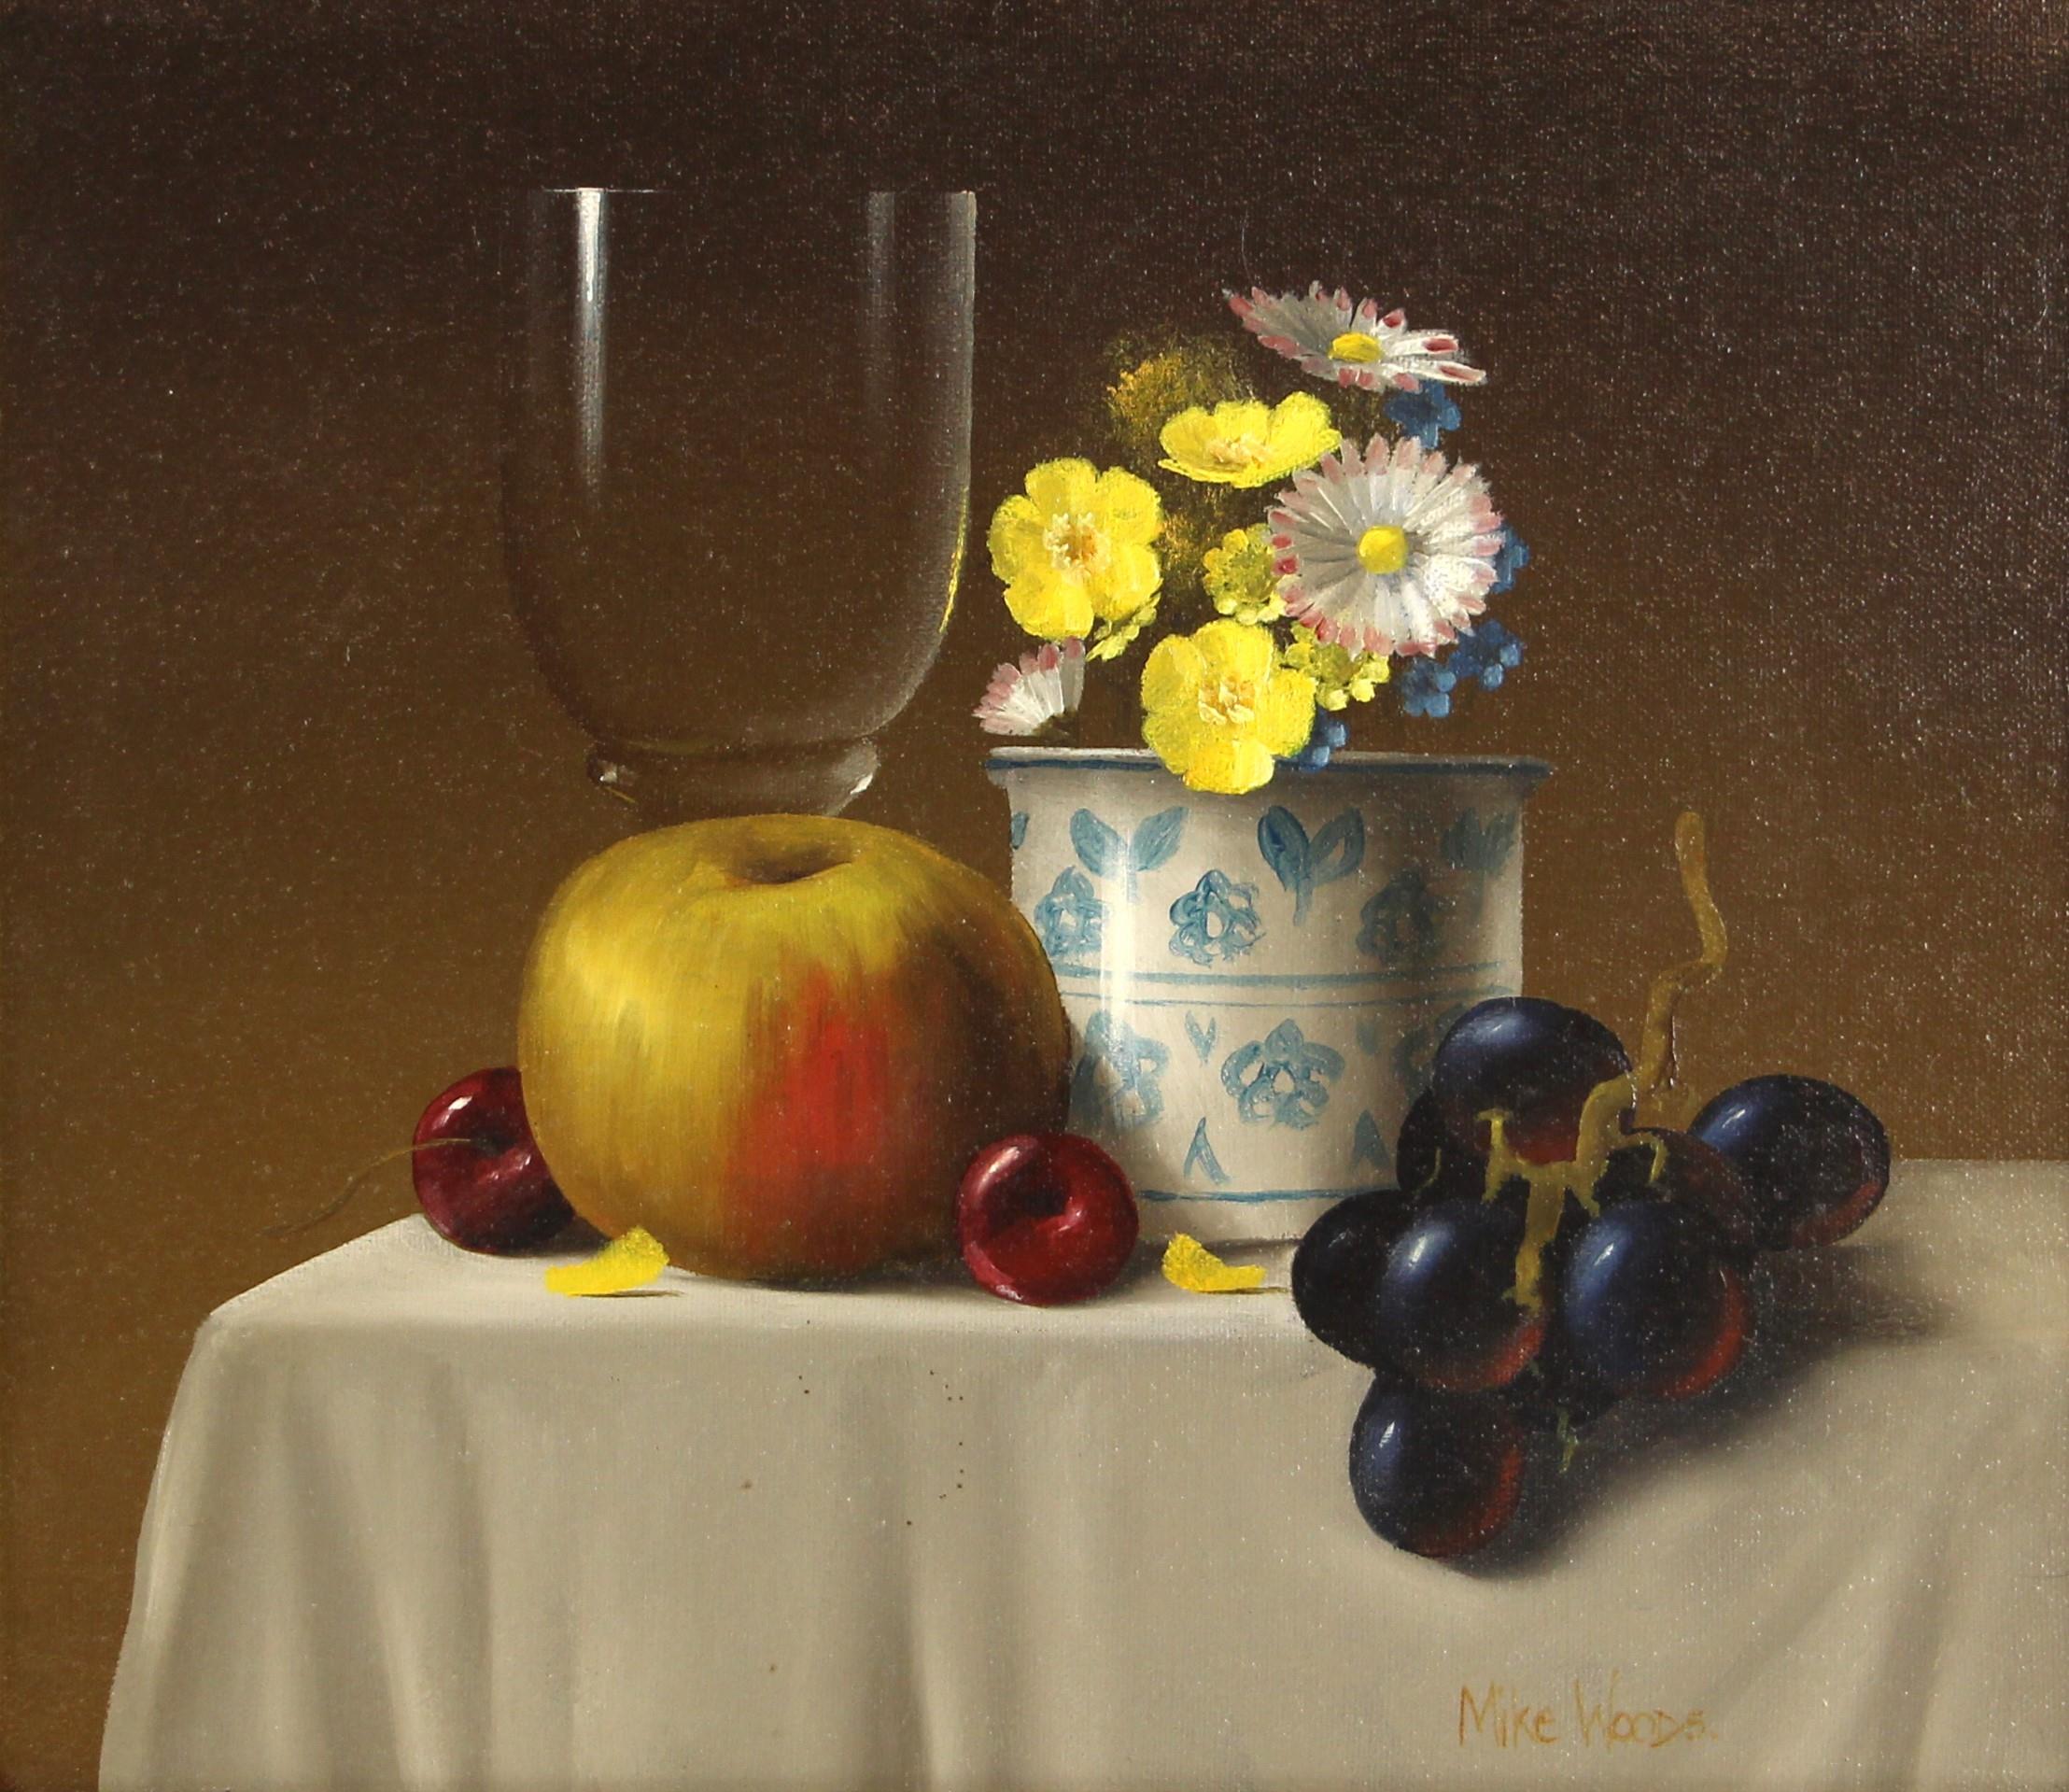 Mike Woods (British, b.1967), Still life with glass, fruit and flowers, Oil on canvas, Signed - Image 2 of 3